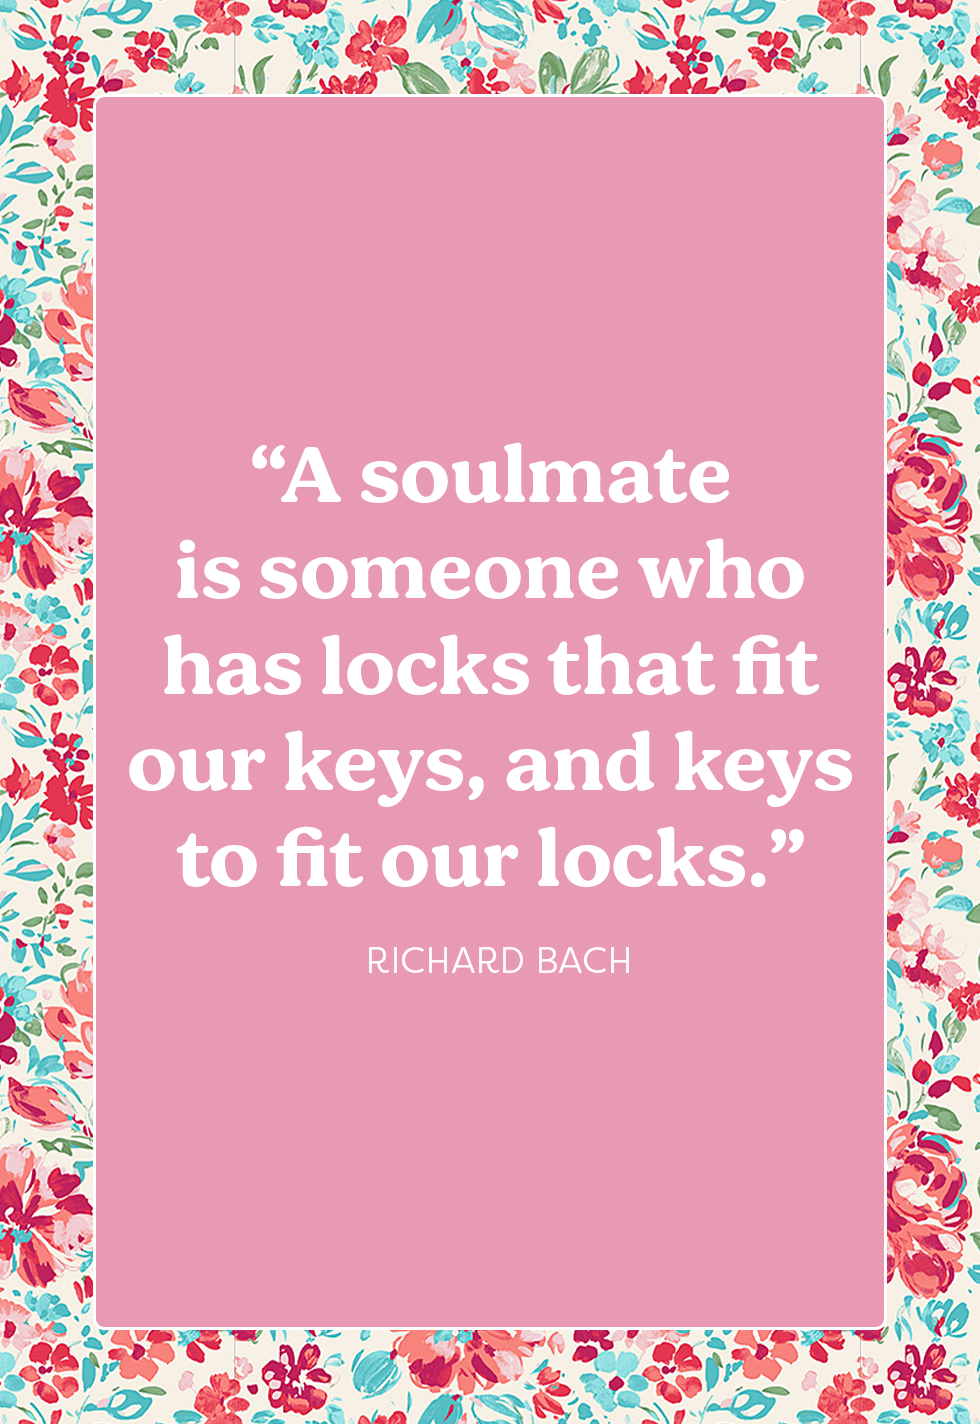 Deep Quotes About Soulmates: A Soulmate Is Someone Who Has Locks That Fit Our Keys